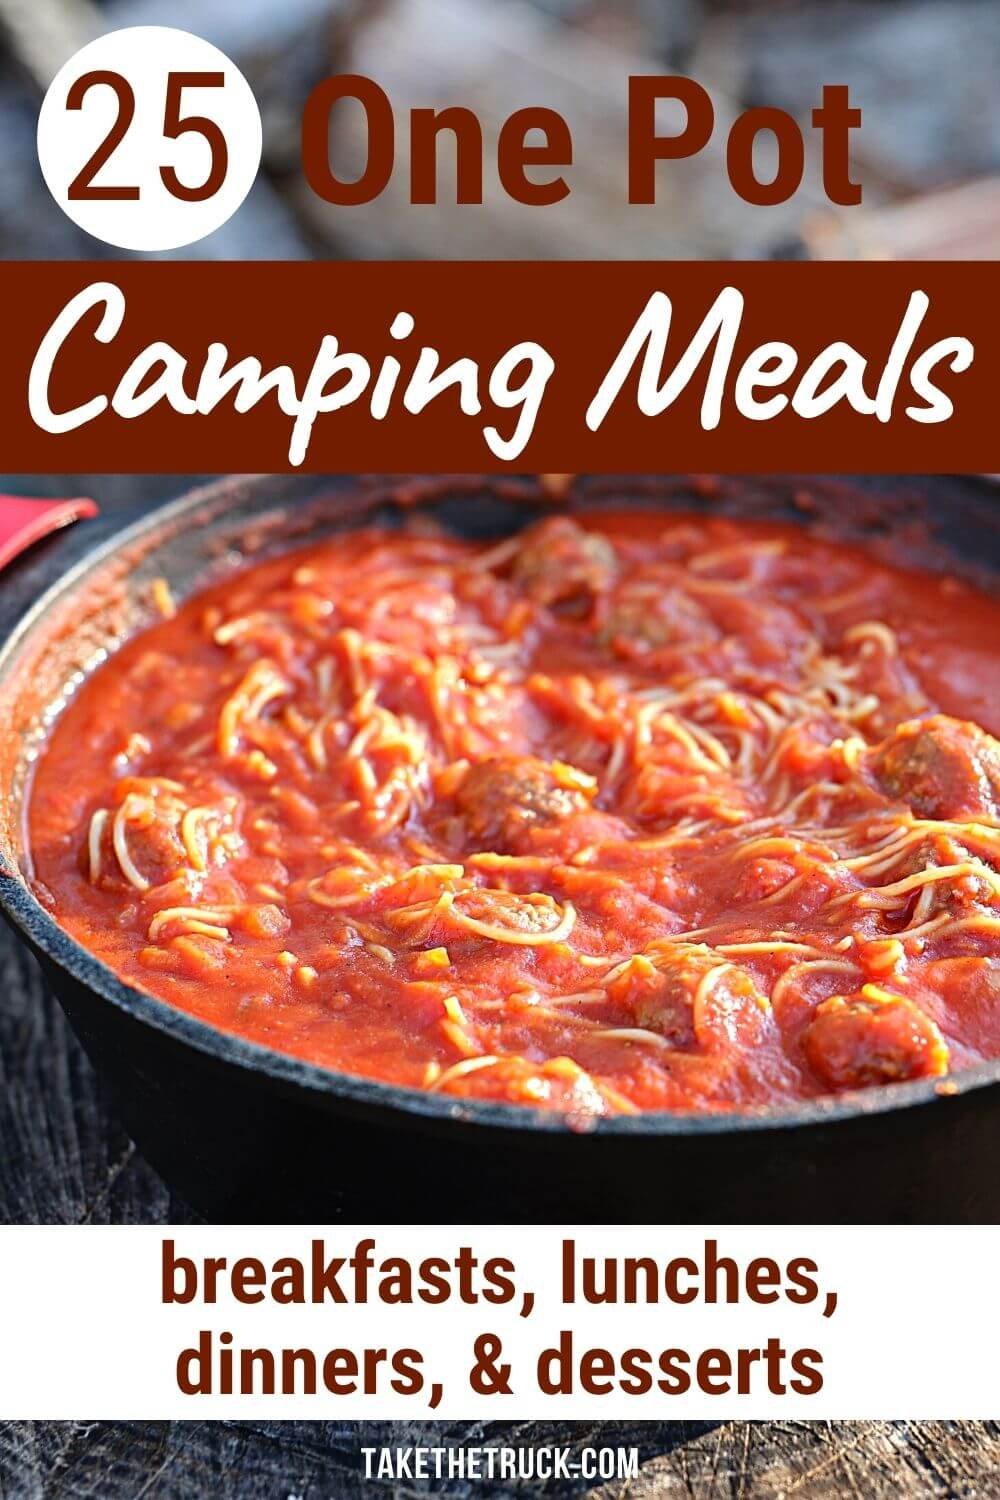 Simple one pot camping meals for families. Extra one pot camping meal dinner ideas. Camping one pot meals free printable showing all the one pot camping recipes.